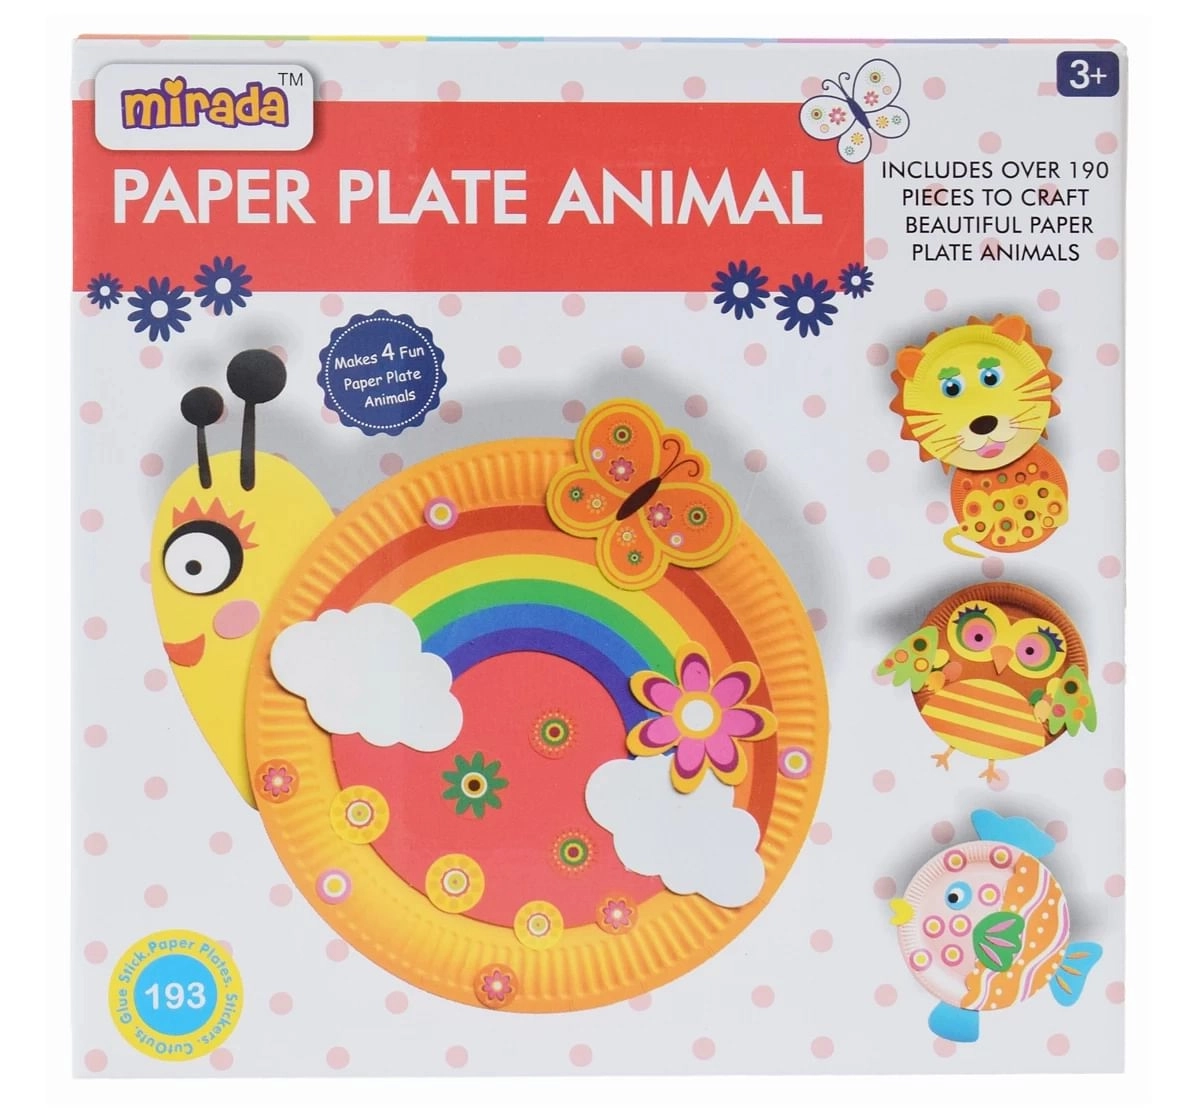  Art Craft Gift for Kids- 12 Paper Plate Art Kit Toy for 2, 3,  4, 5 Years Old Boys Girls Toddler, DIY Animal Art Supplies for Children  Preschool Classroom/ Party Favor/